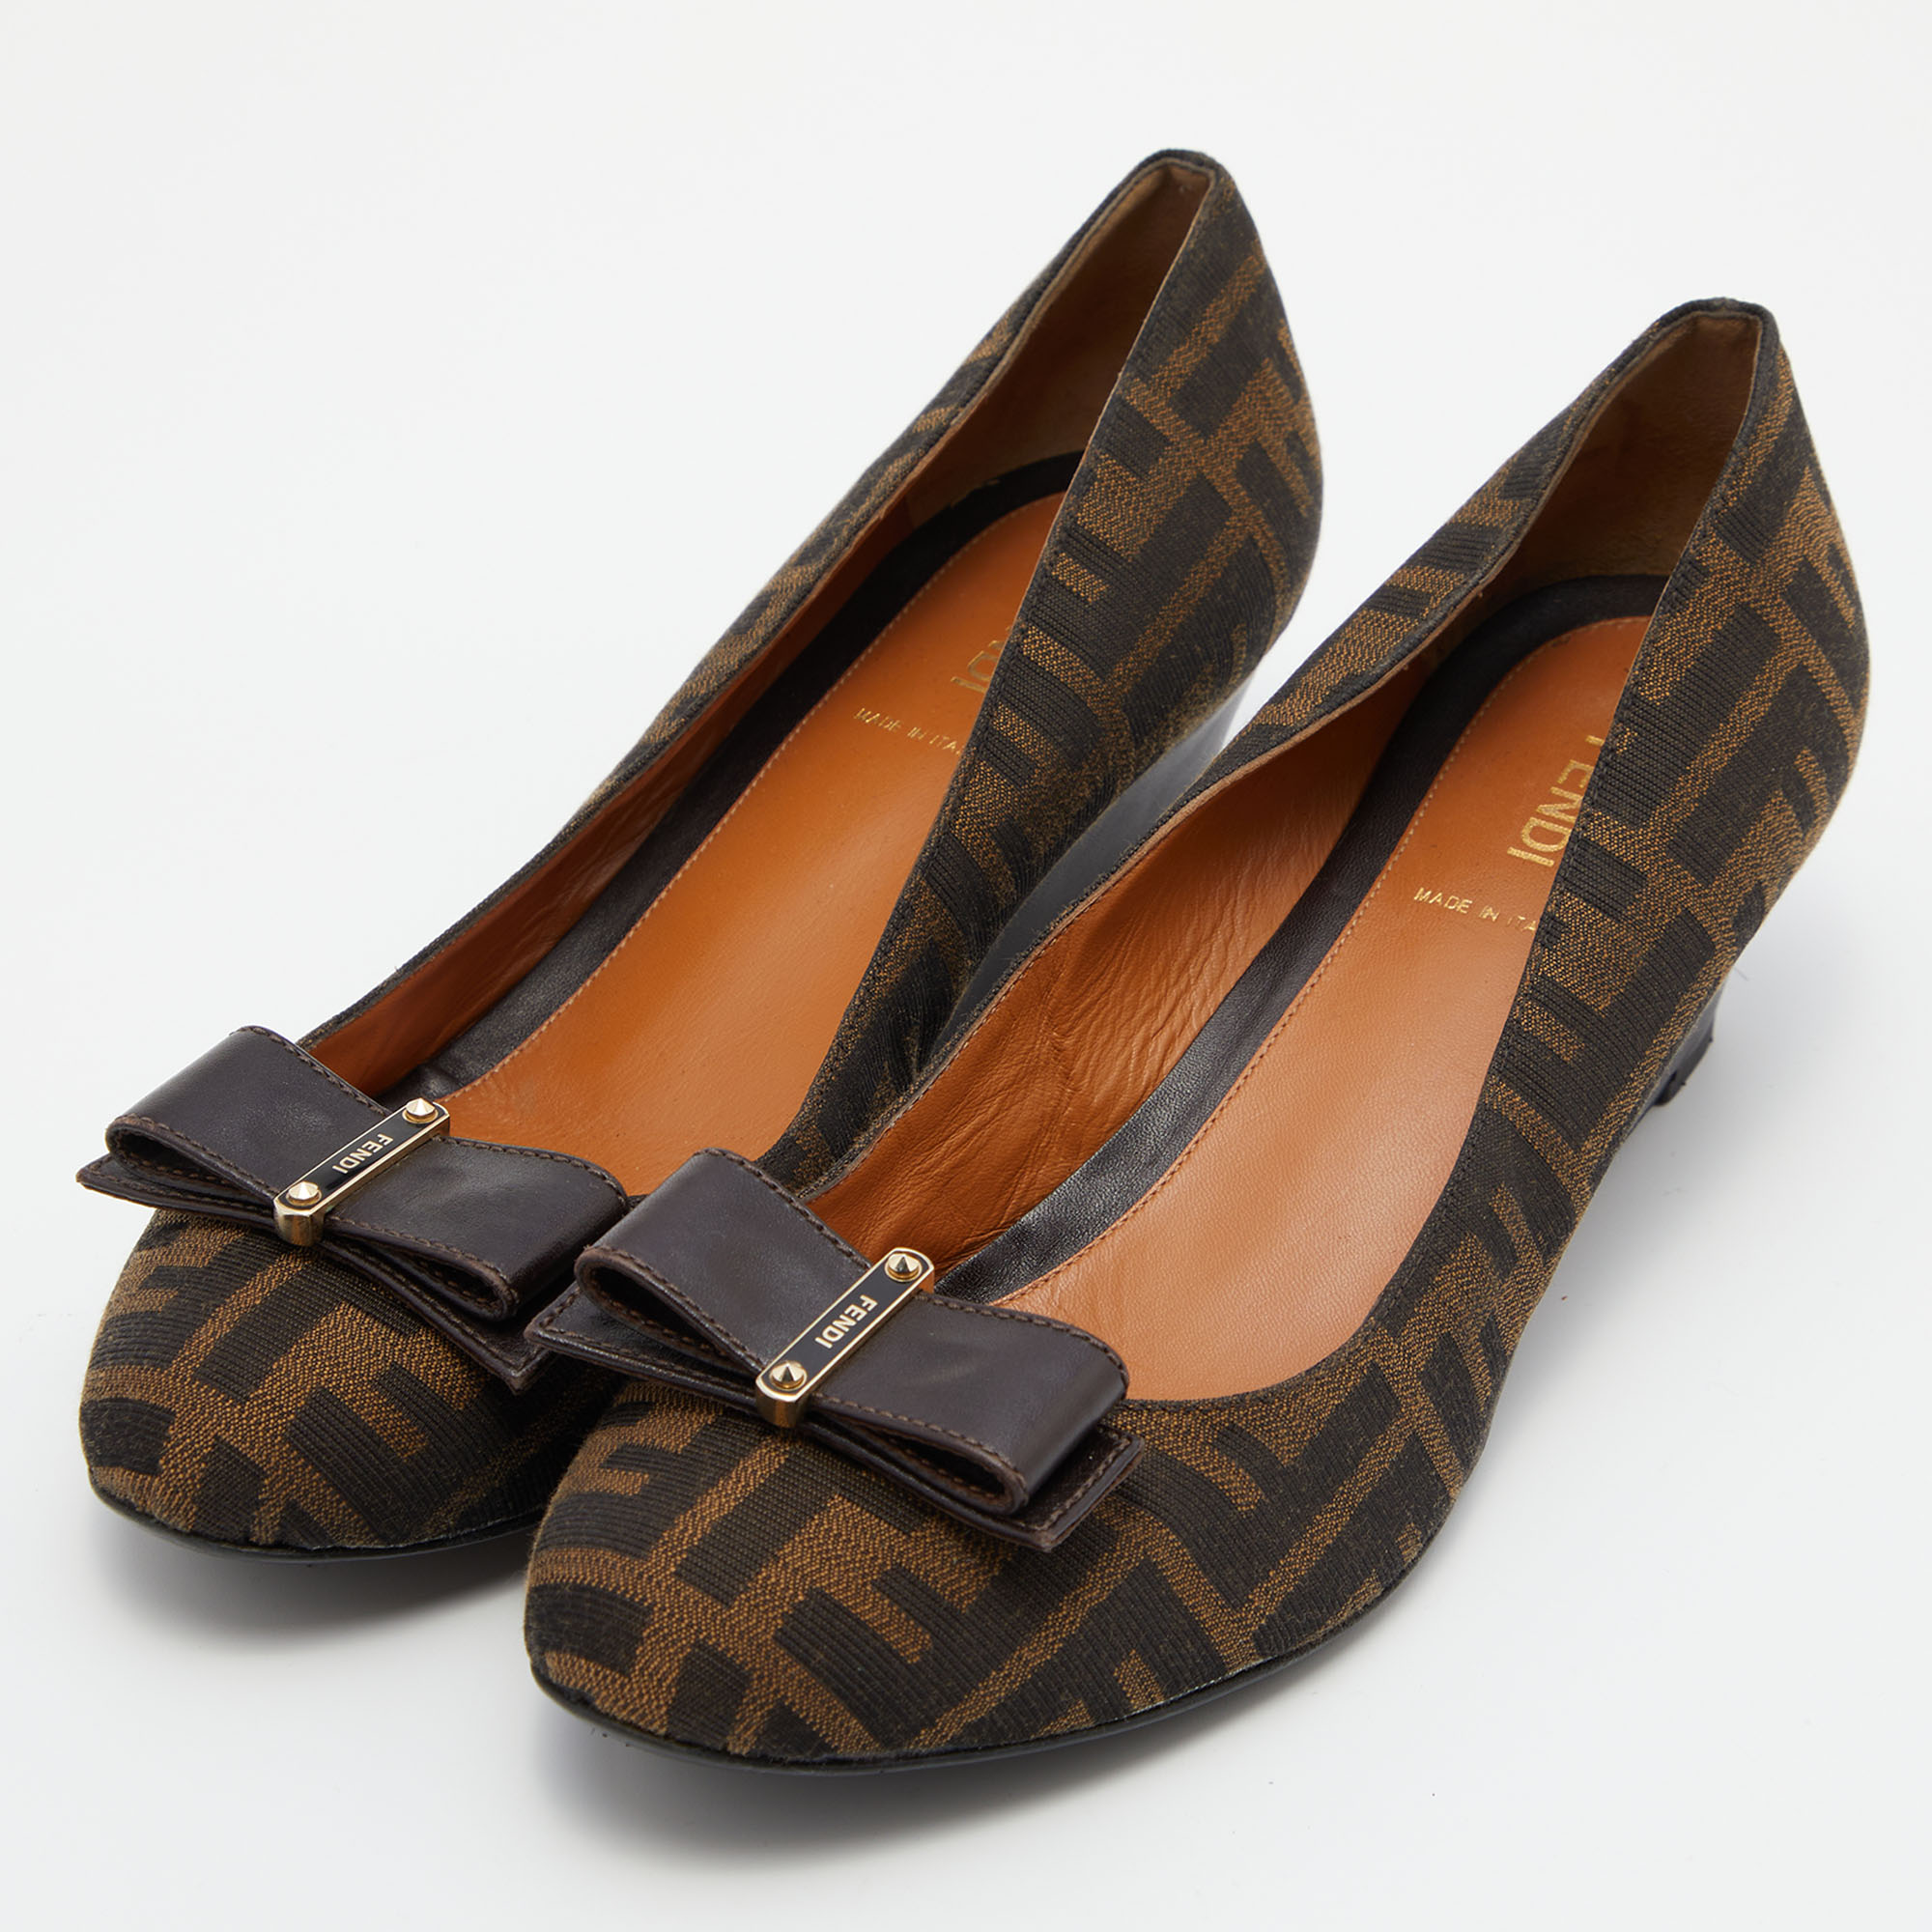 

Fendi Tobacco Zucca Canvas and Leather Bow Round Toe Wedge Pumps Size, Brown